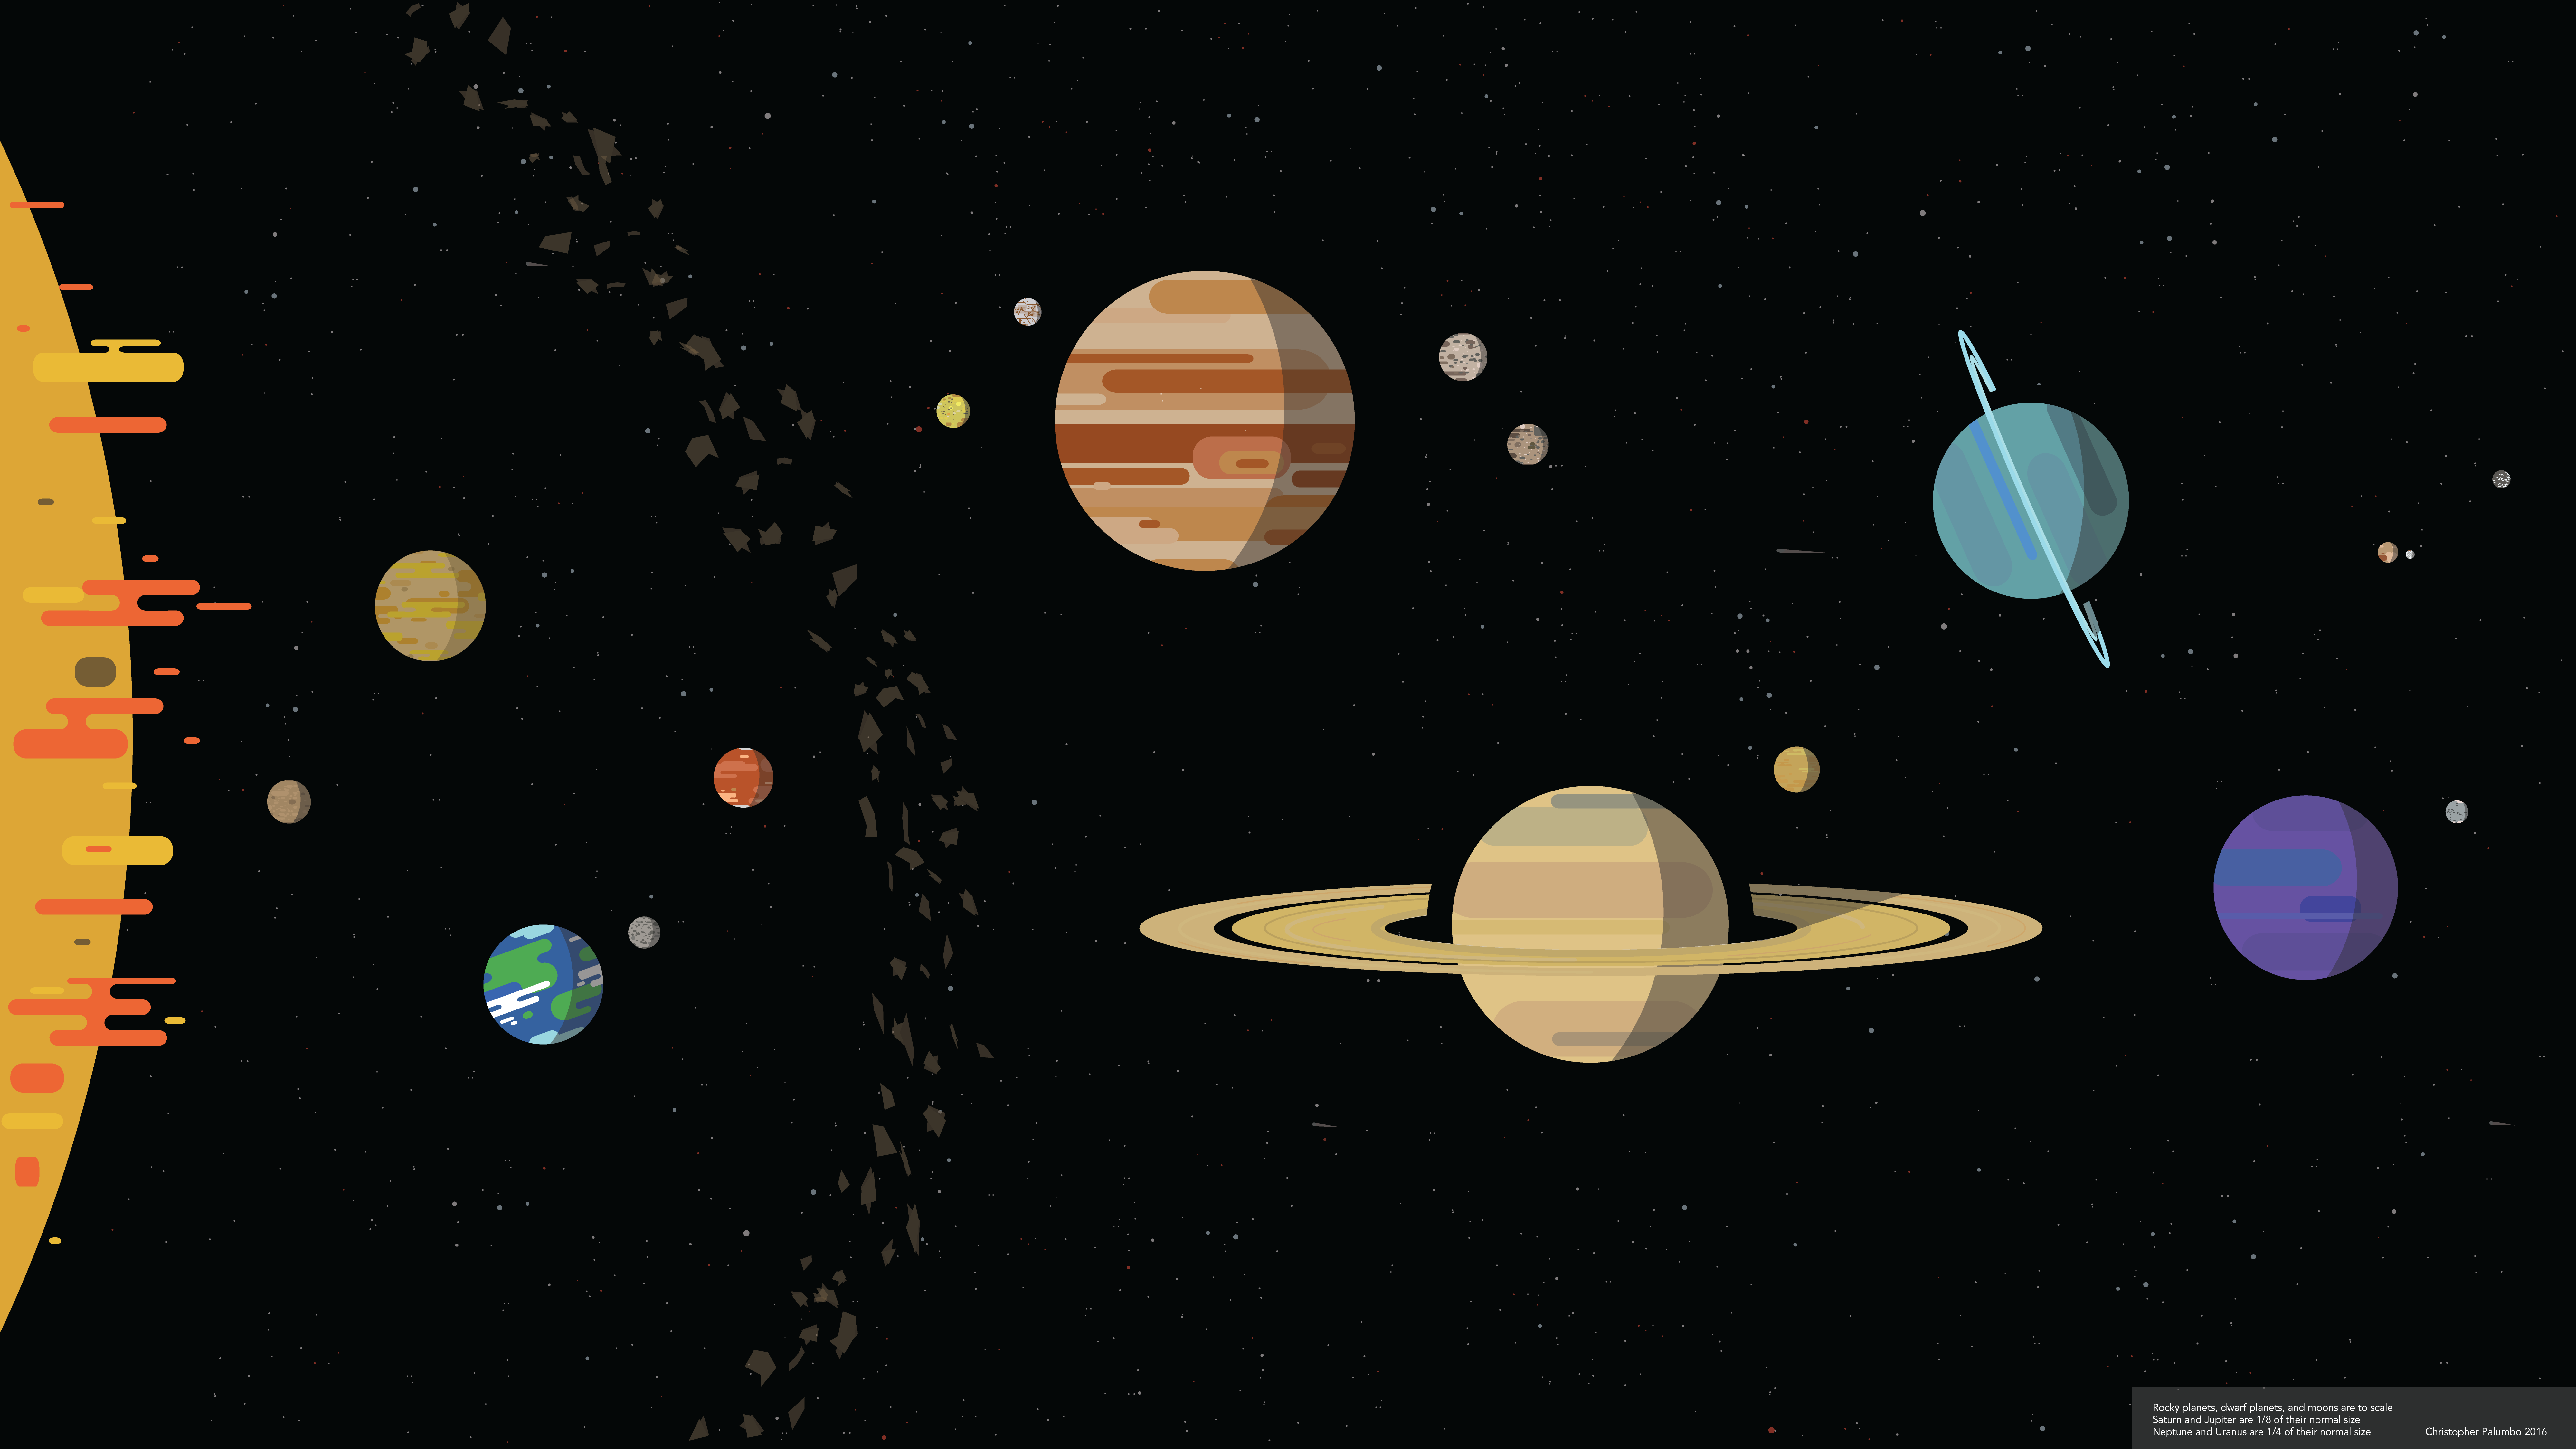 Stylized Scale Solar System Wallpaper (Based On Advice From R Space)